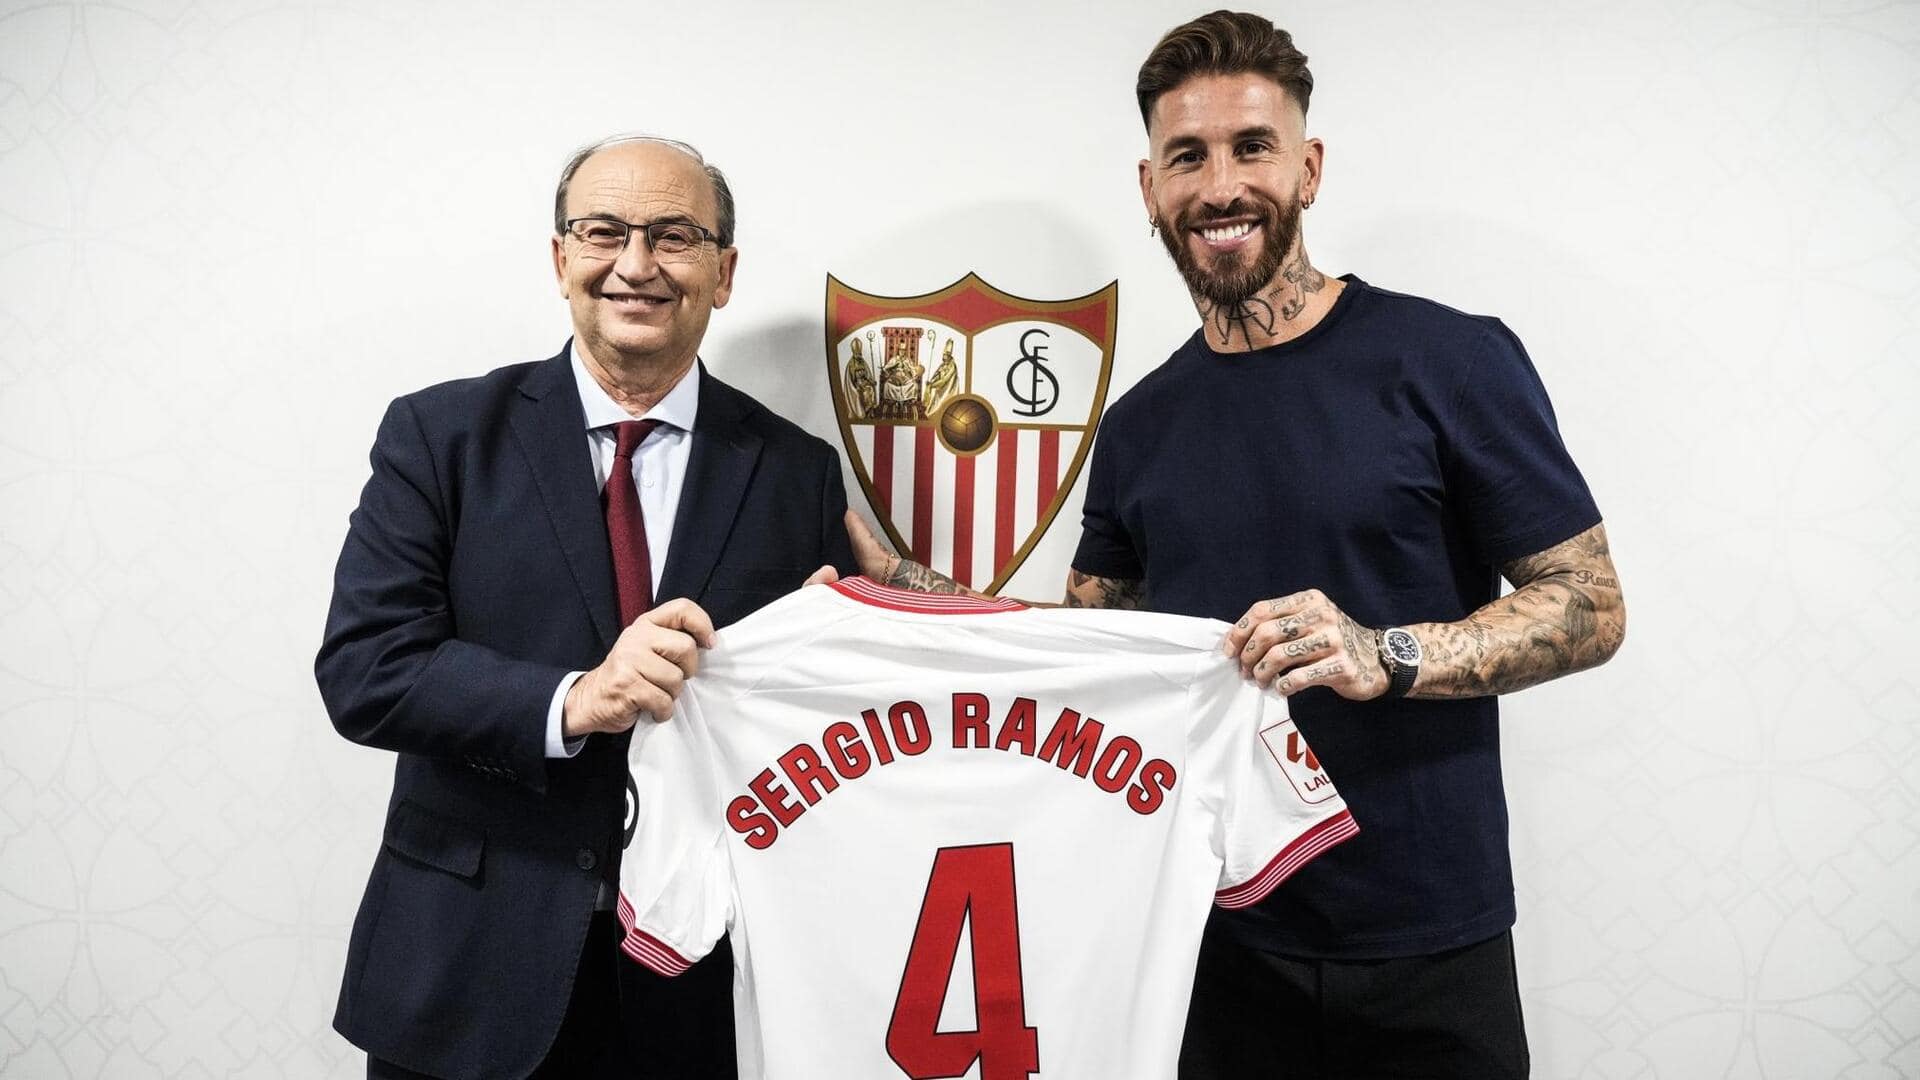 Sergio Ramos joins Sevilla after 18 years: Decoding his stats